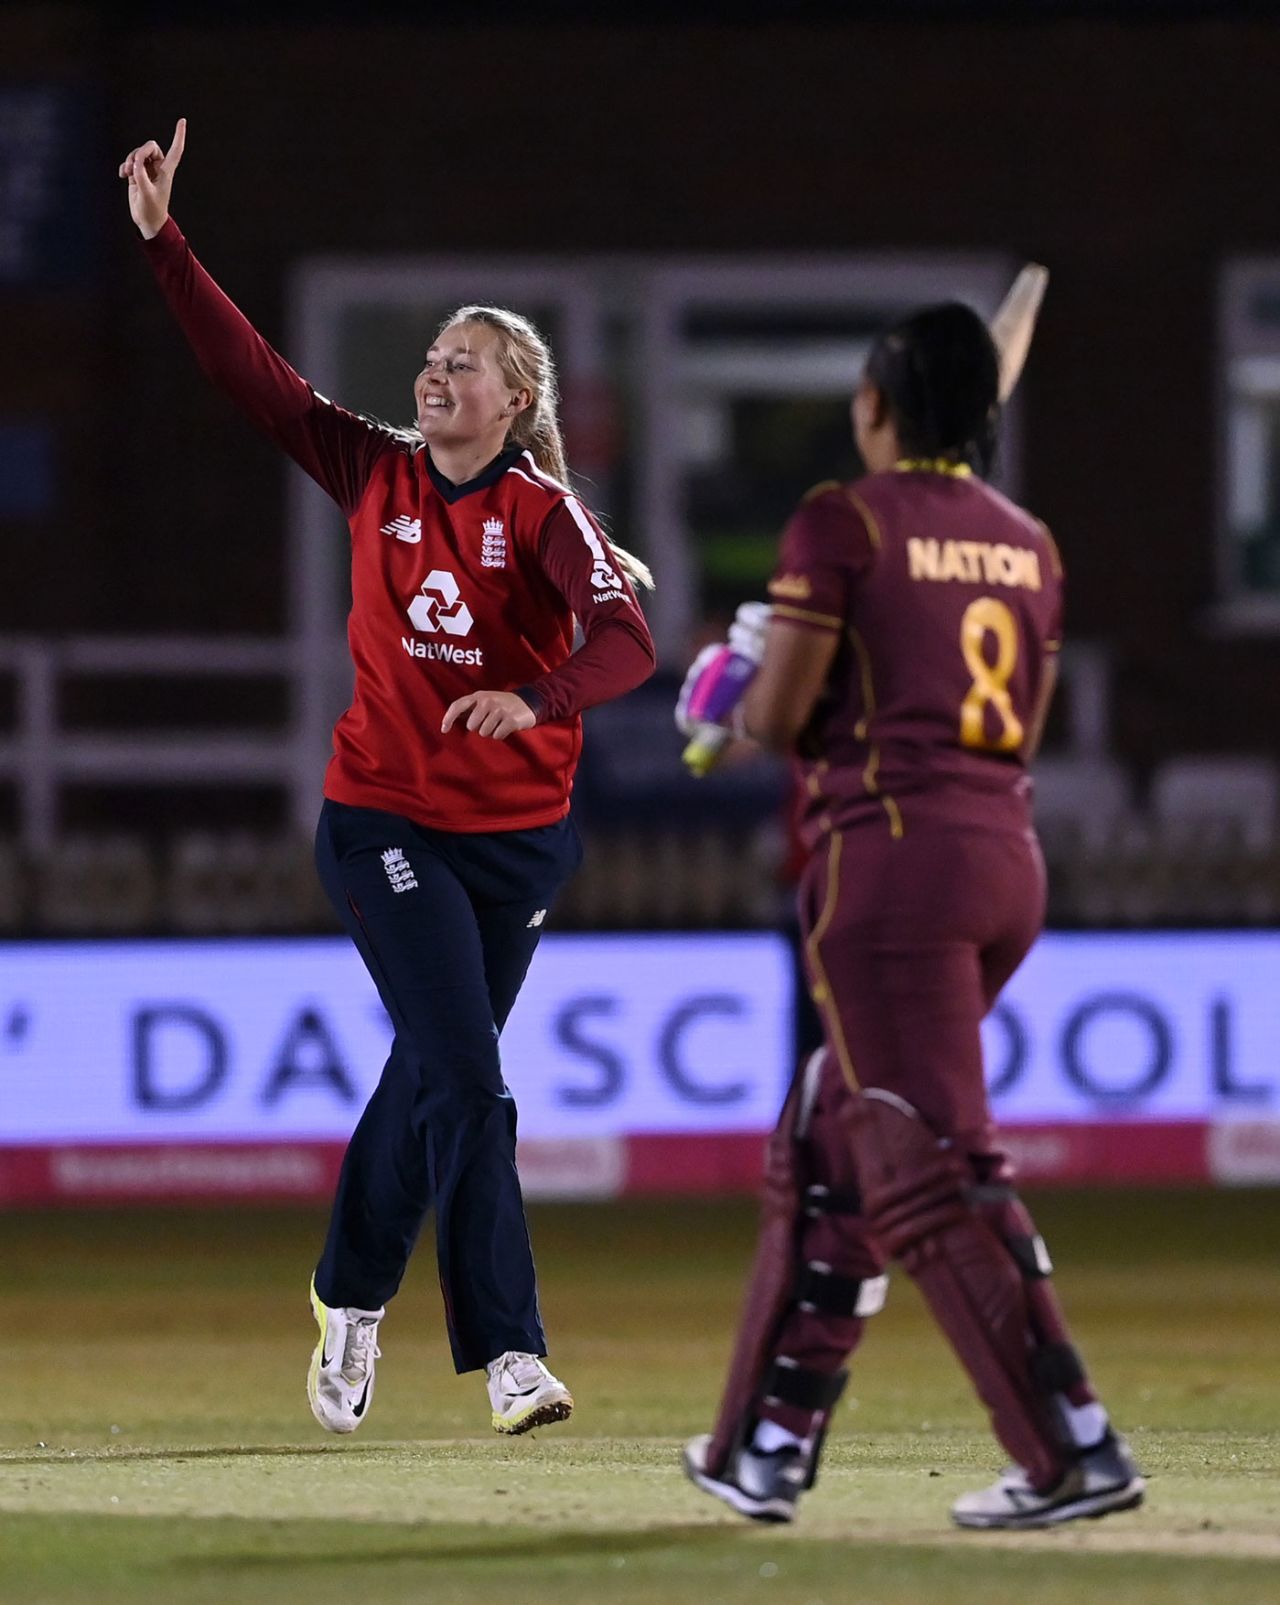 Sophie Ecclestone claims the wicket of Chedean Nation, England Women vs West Indies Women, 5th T20I, Derby September 30, 2020